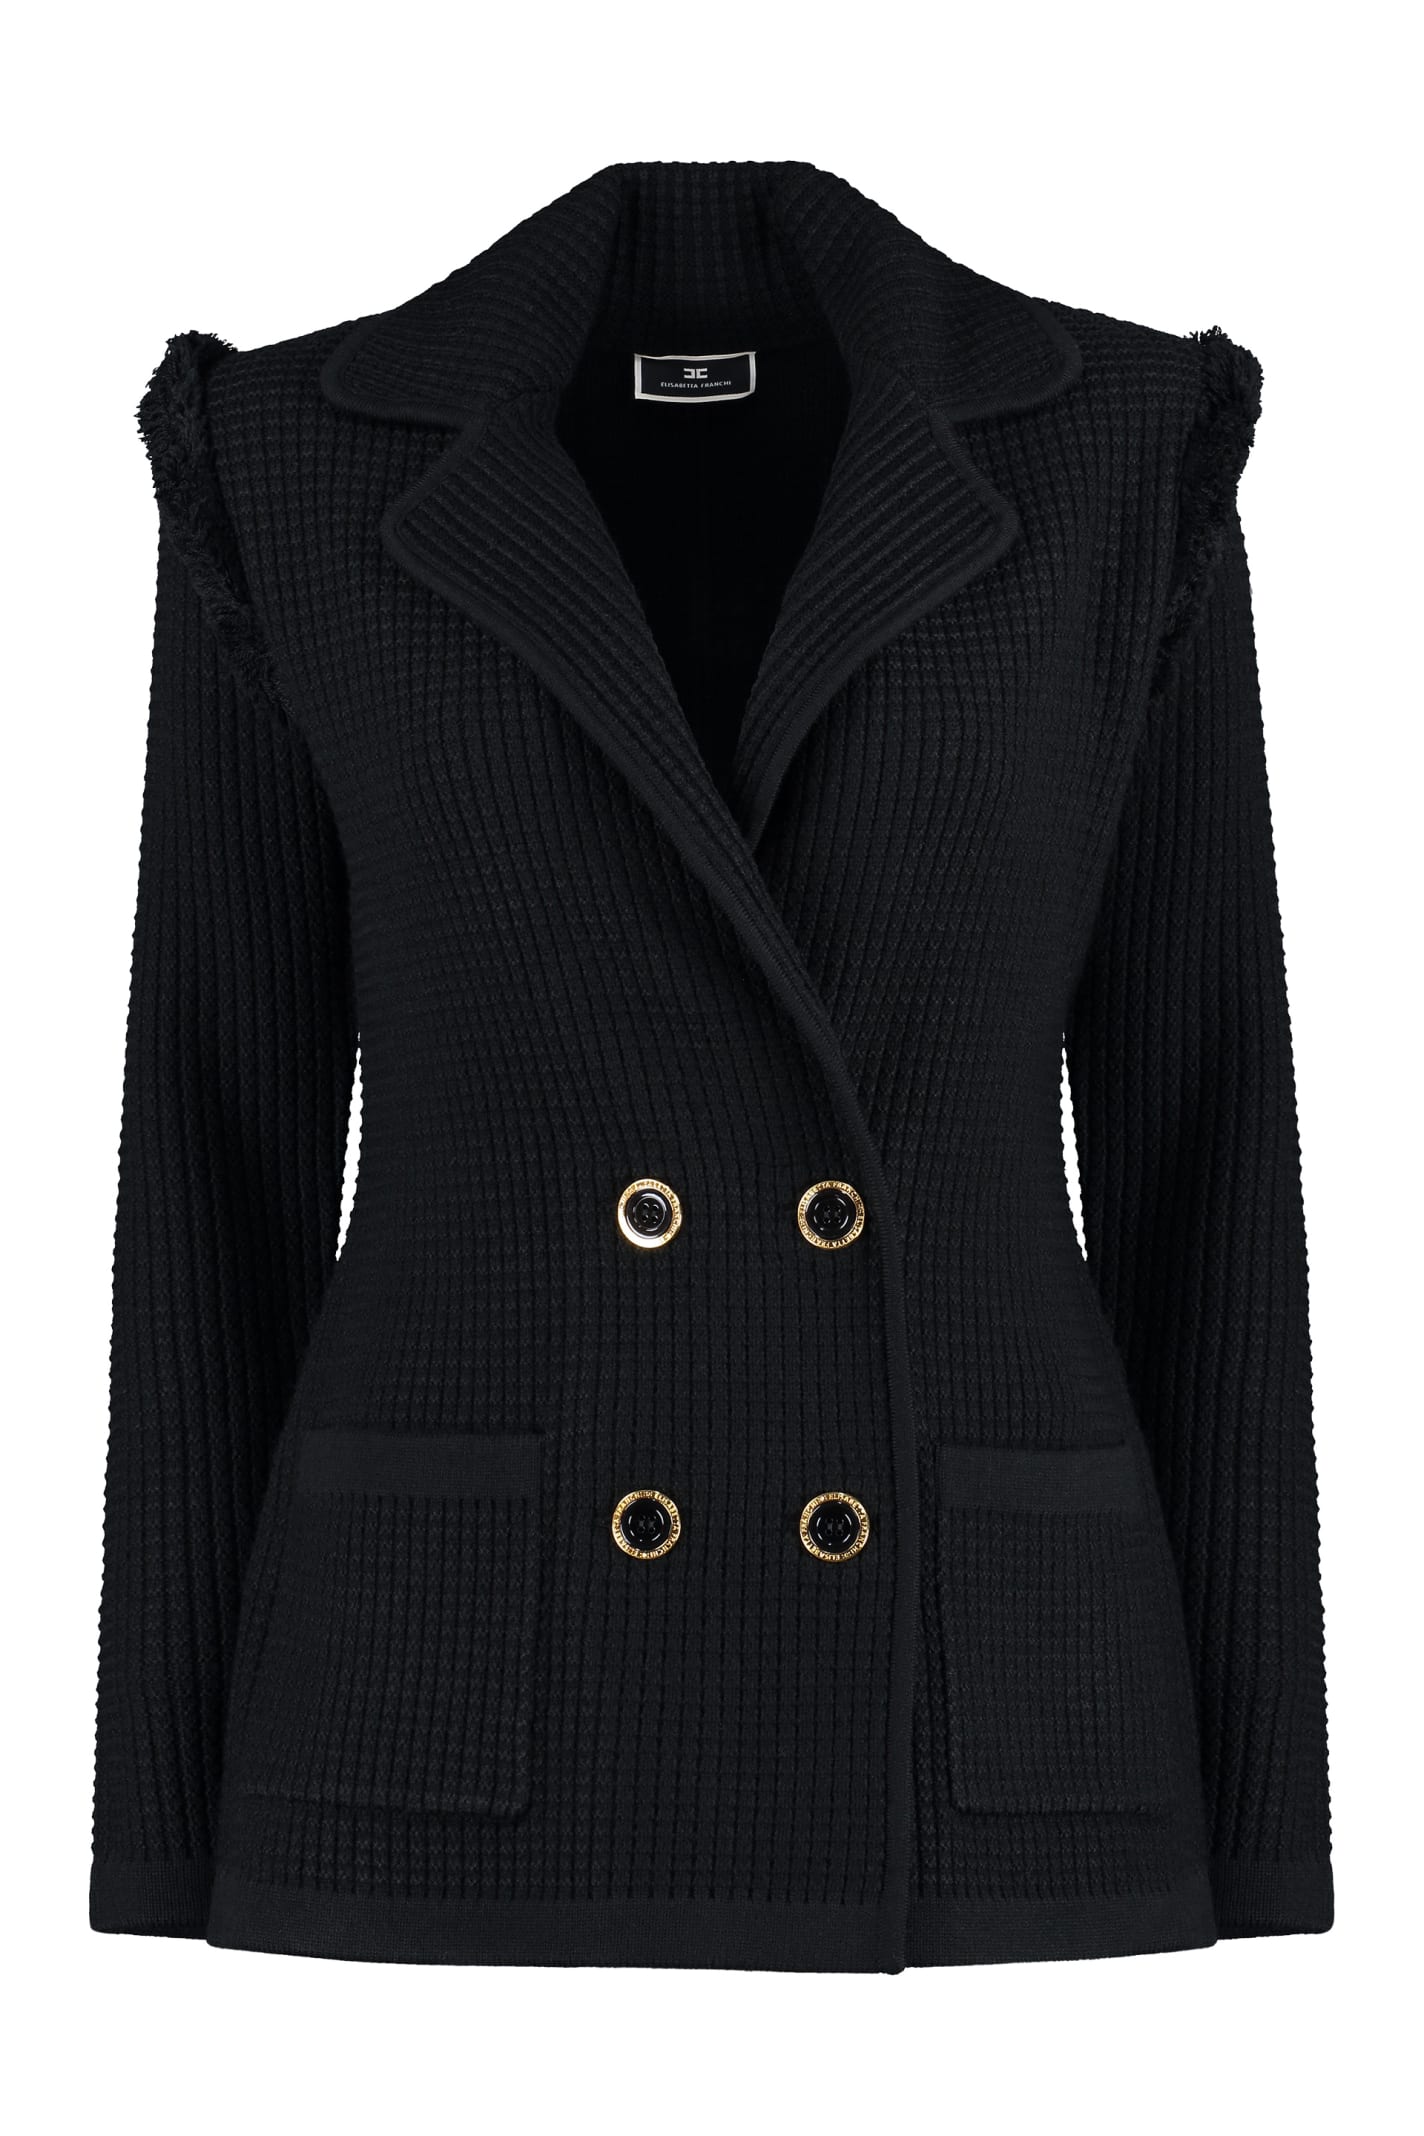 Elisabetta Franchi Knitted Double-breasted Blazer